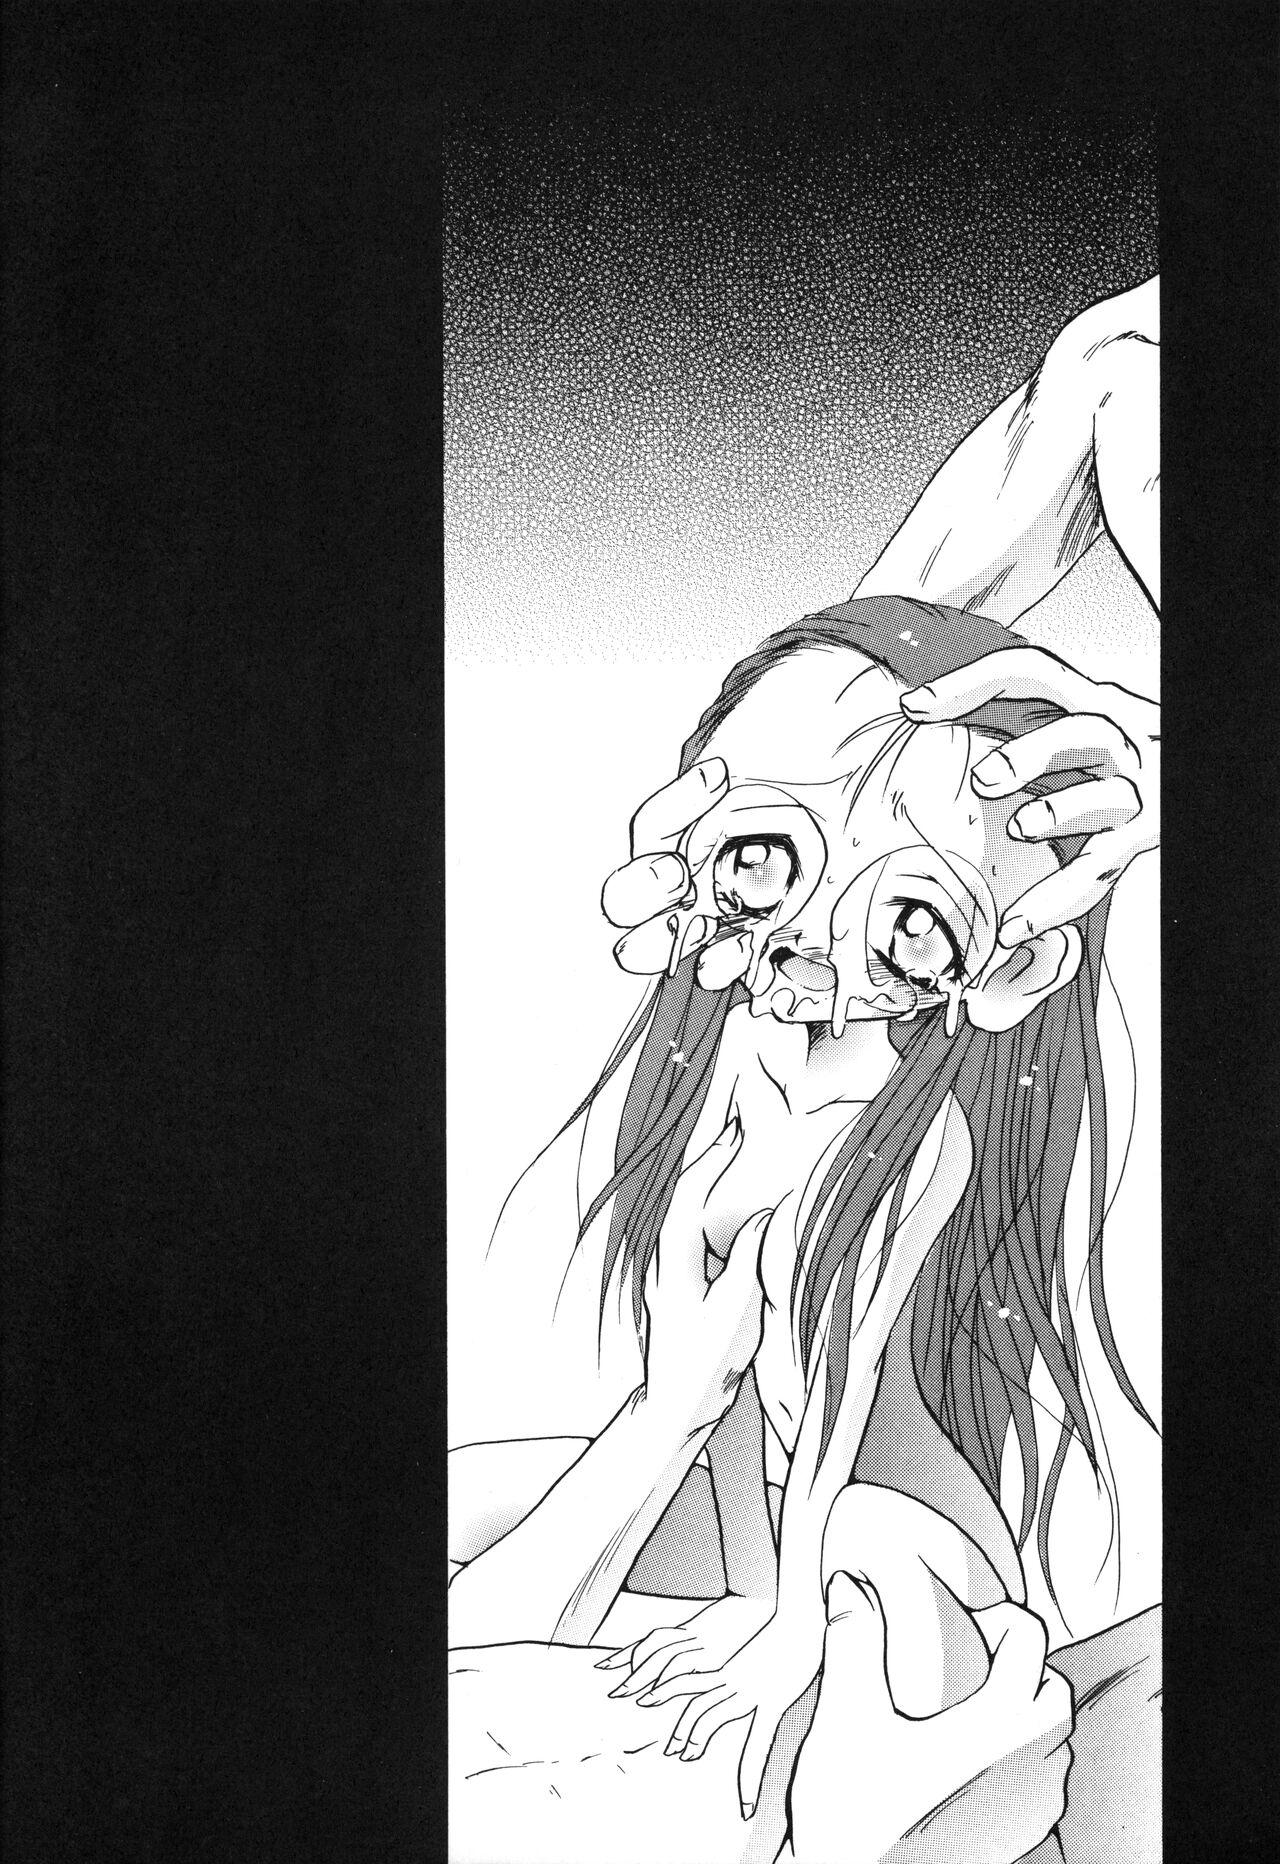 Hot Girl Fuck Get Sweet ”A” Low Phone ”DIGIMON ADVENTURE” - Digimon Pee - Page 4